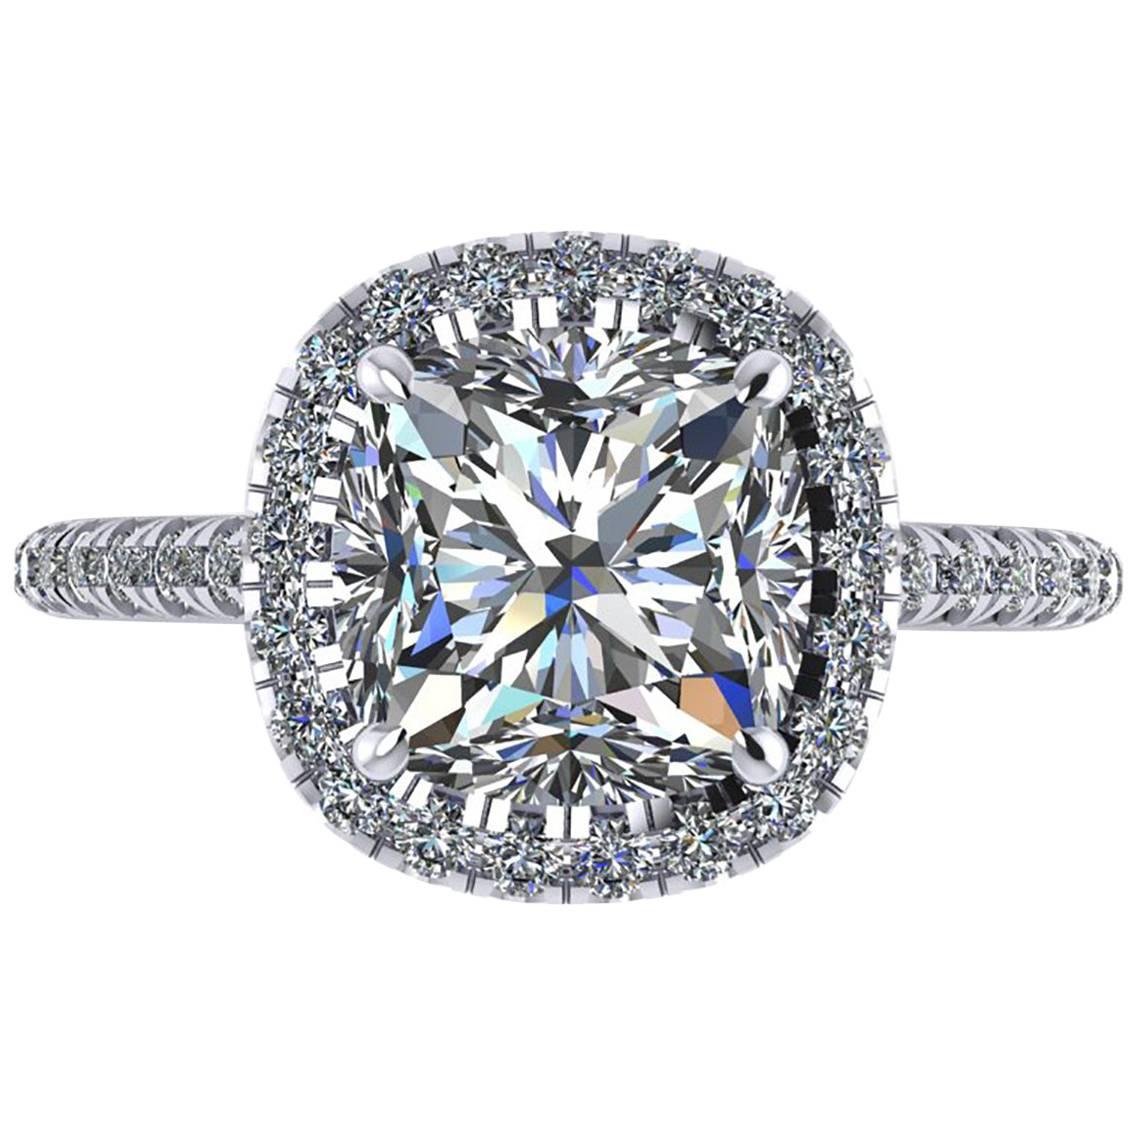 GIA Certified 2.01 Carat Cushion Cut Diamond H Color Pave Engagement Ring